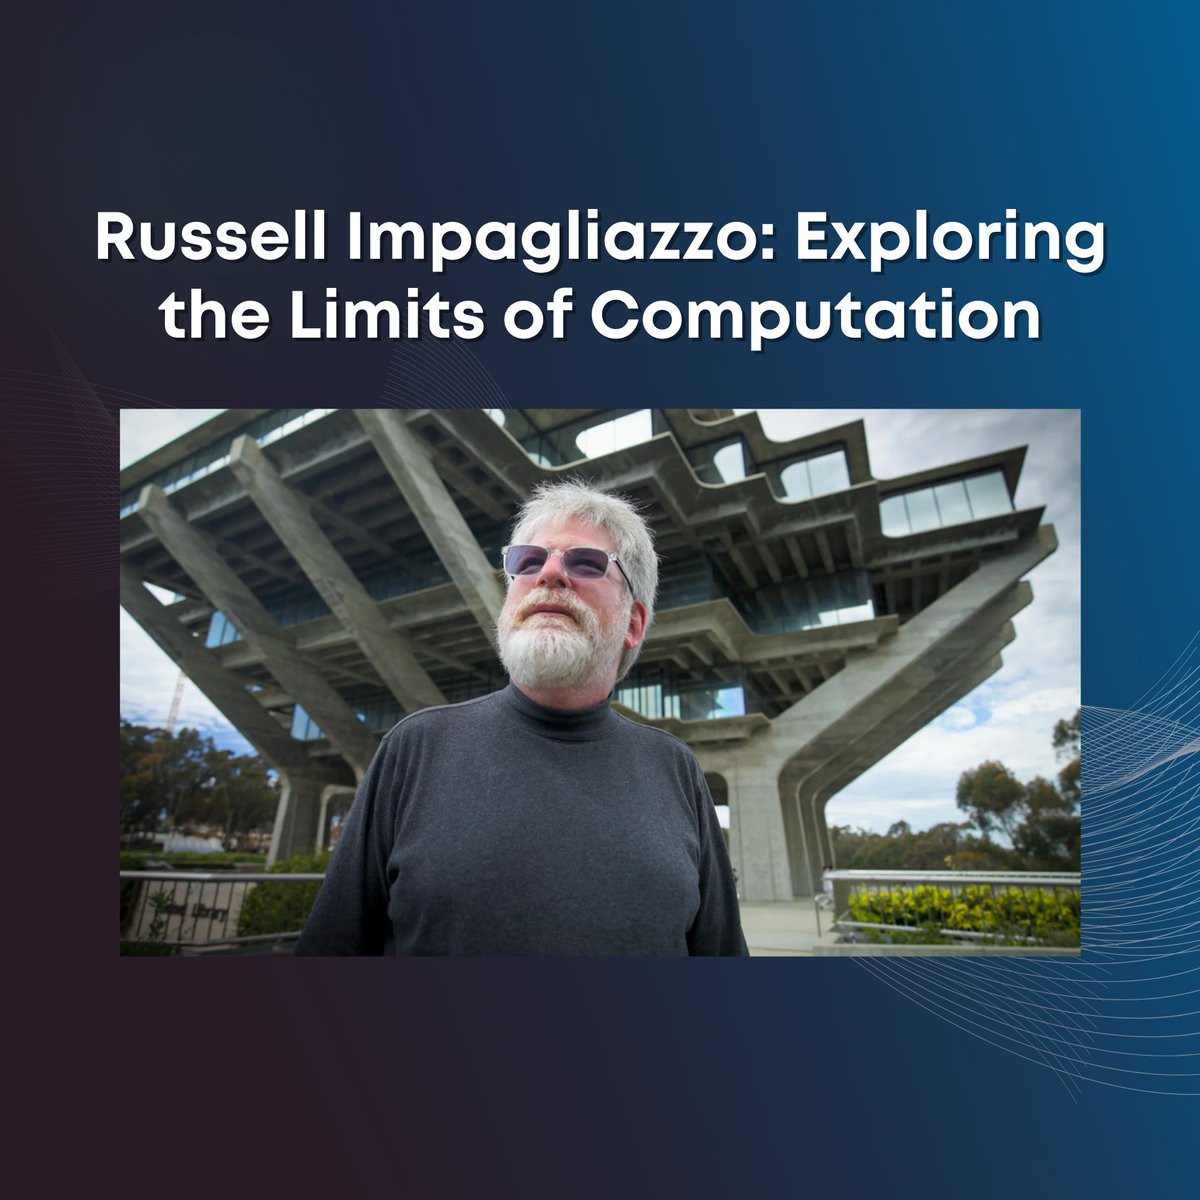 For 40+ years, Russell Impagliazzo has revolutionized complexity theory, challenging the P vs NP problem with his 'five worlds' framework. His blend of technical genius and creative passion has reshaped research approaches. Read more: tinyurl.com/bdd8vhwd